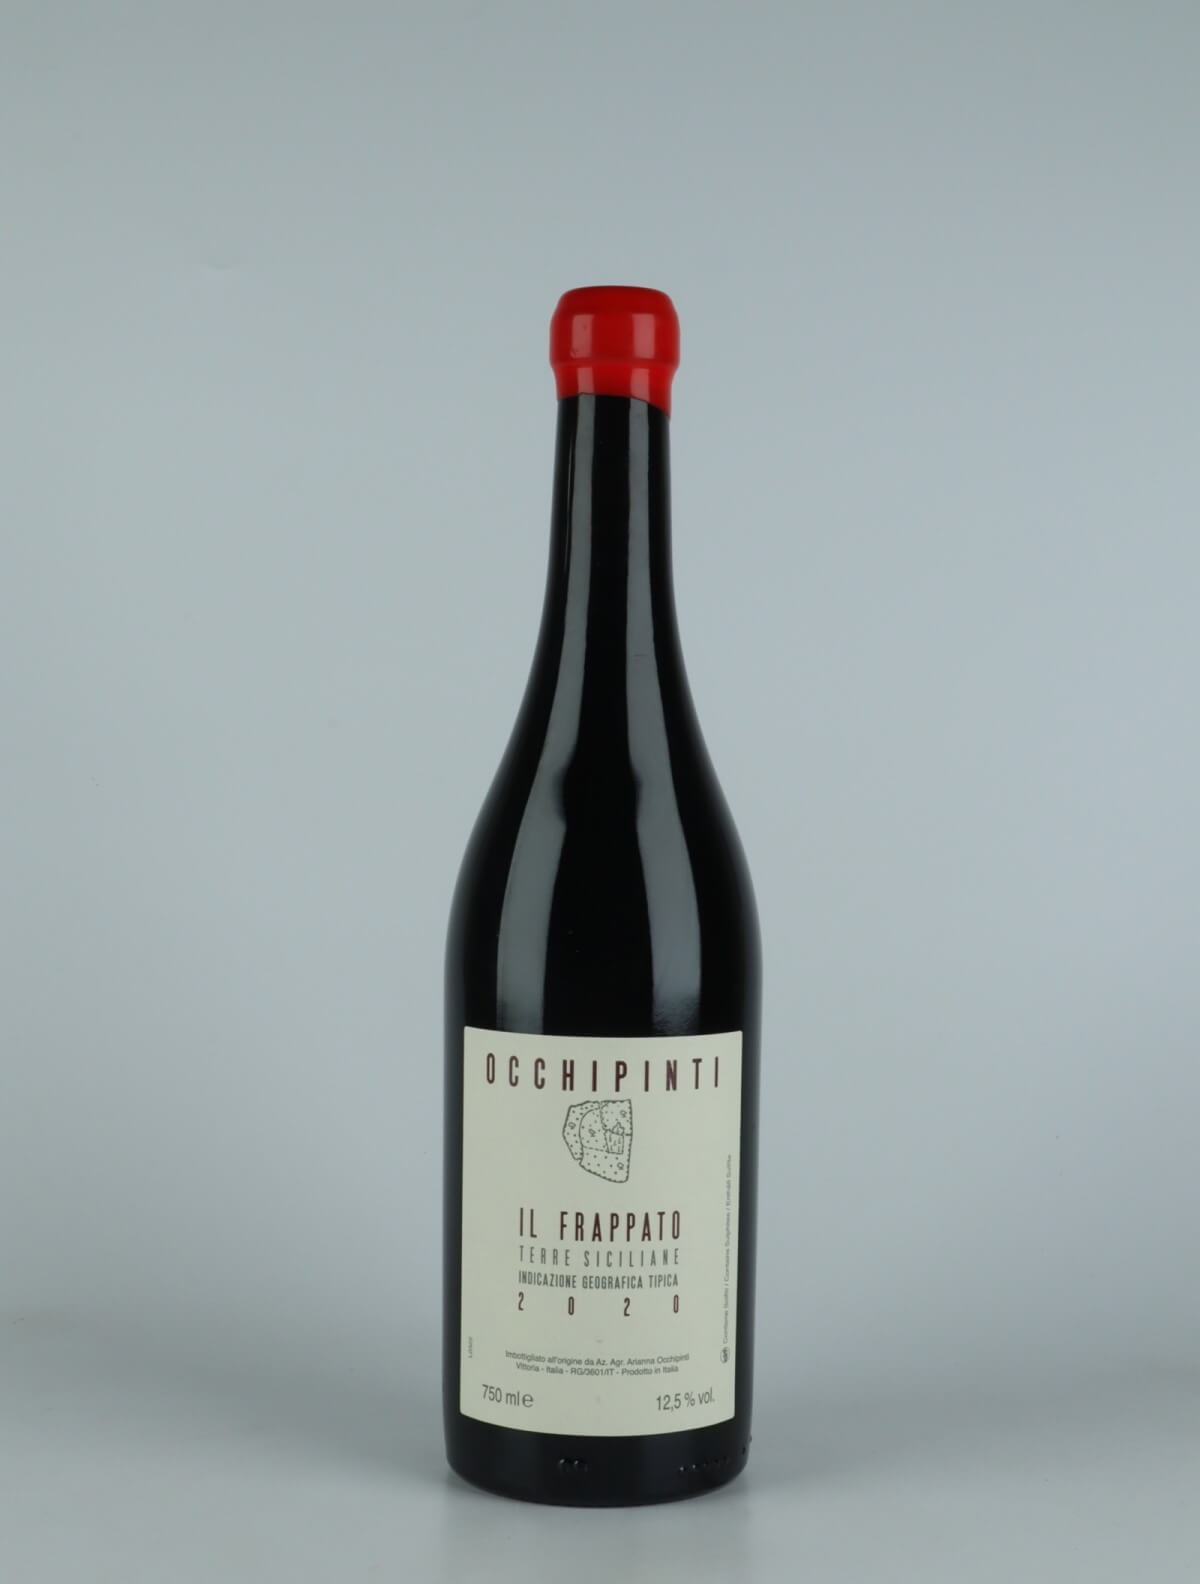 A bottle 2020 Il Frappato Red wine from Arianna Occhipinti, Sicily in Italy